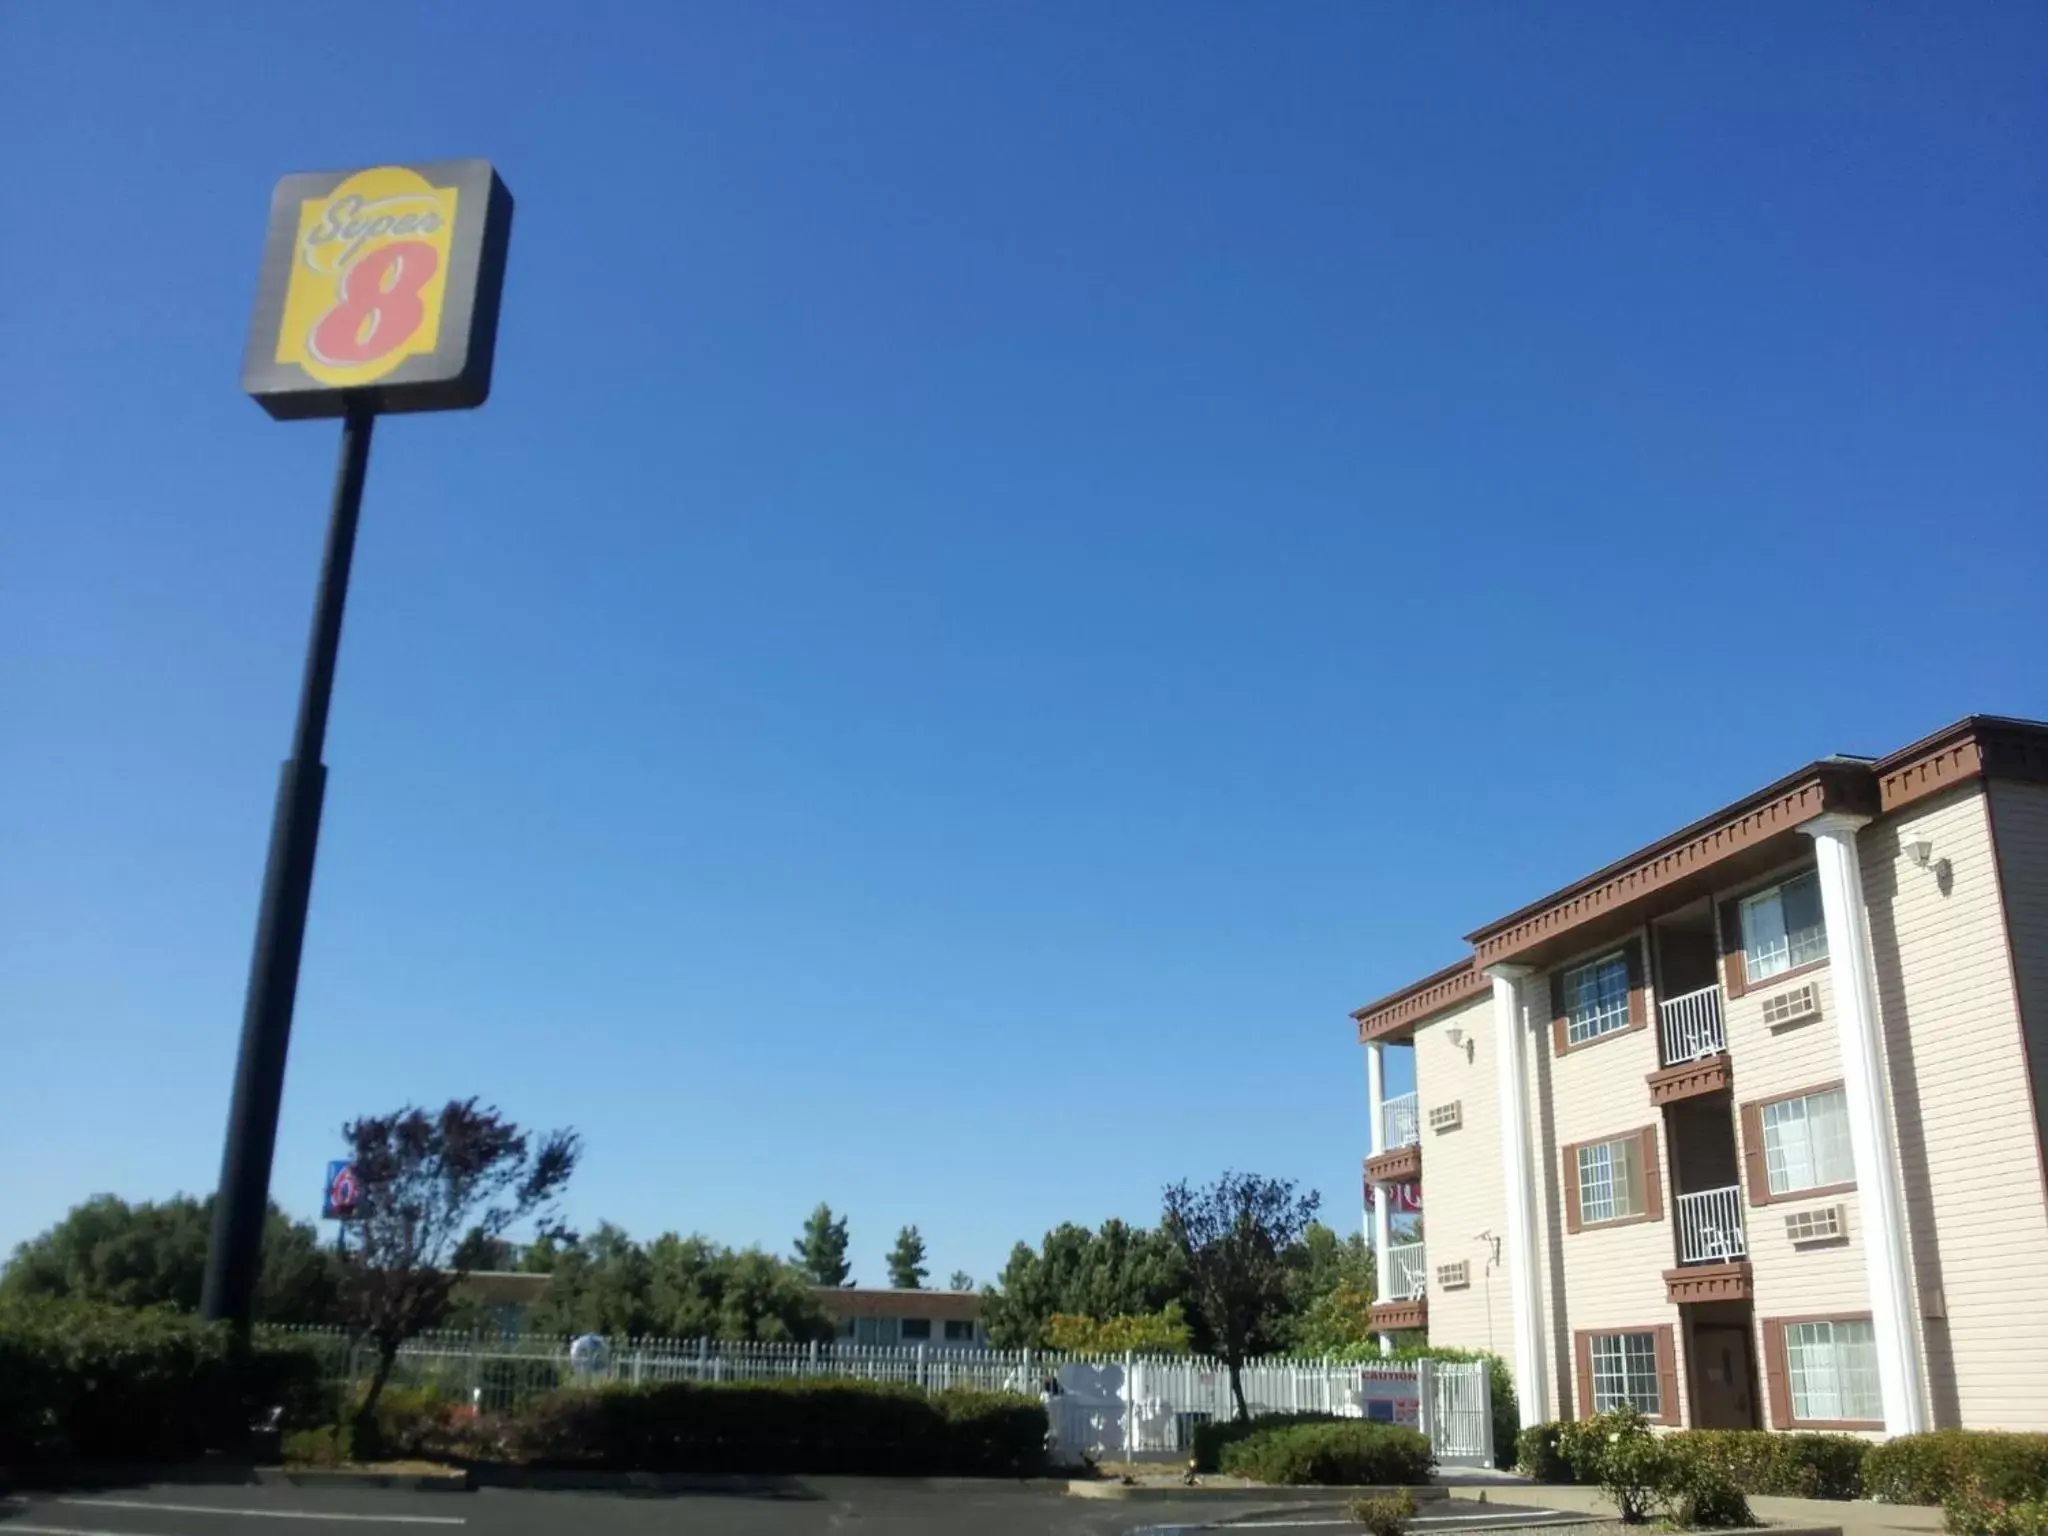 Property building in Super 8 by Wyndham Oroville